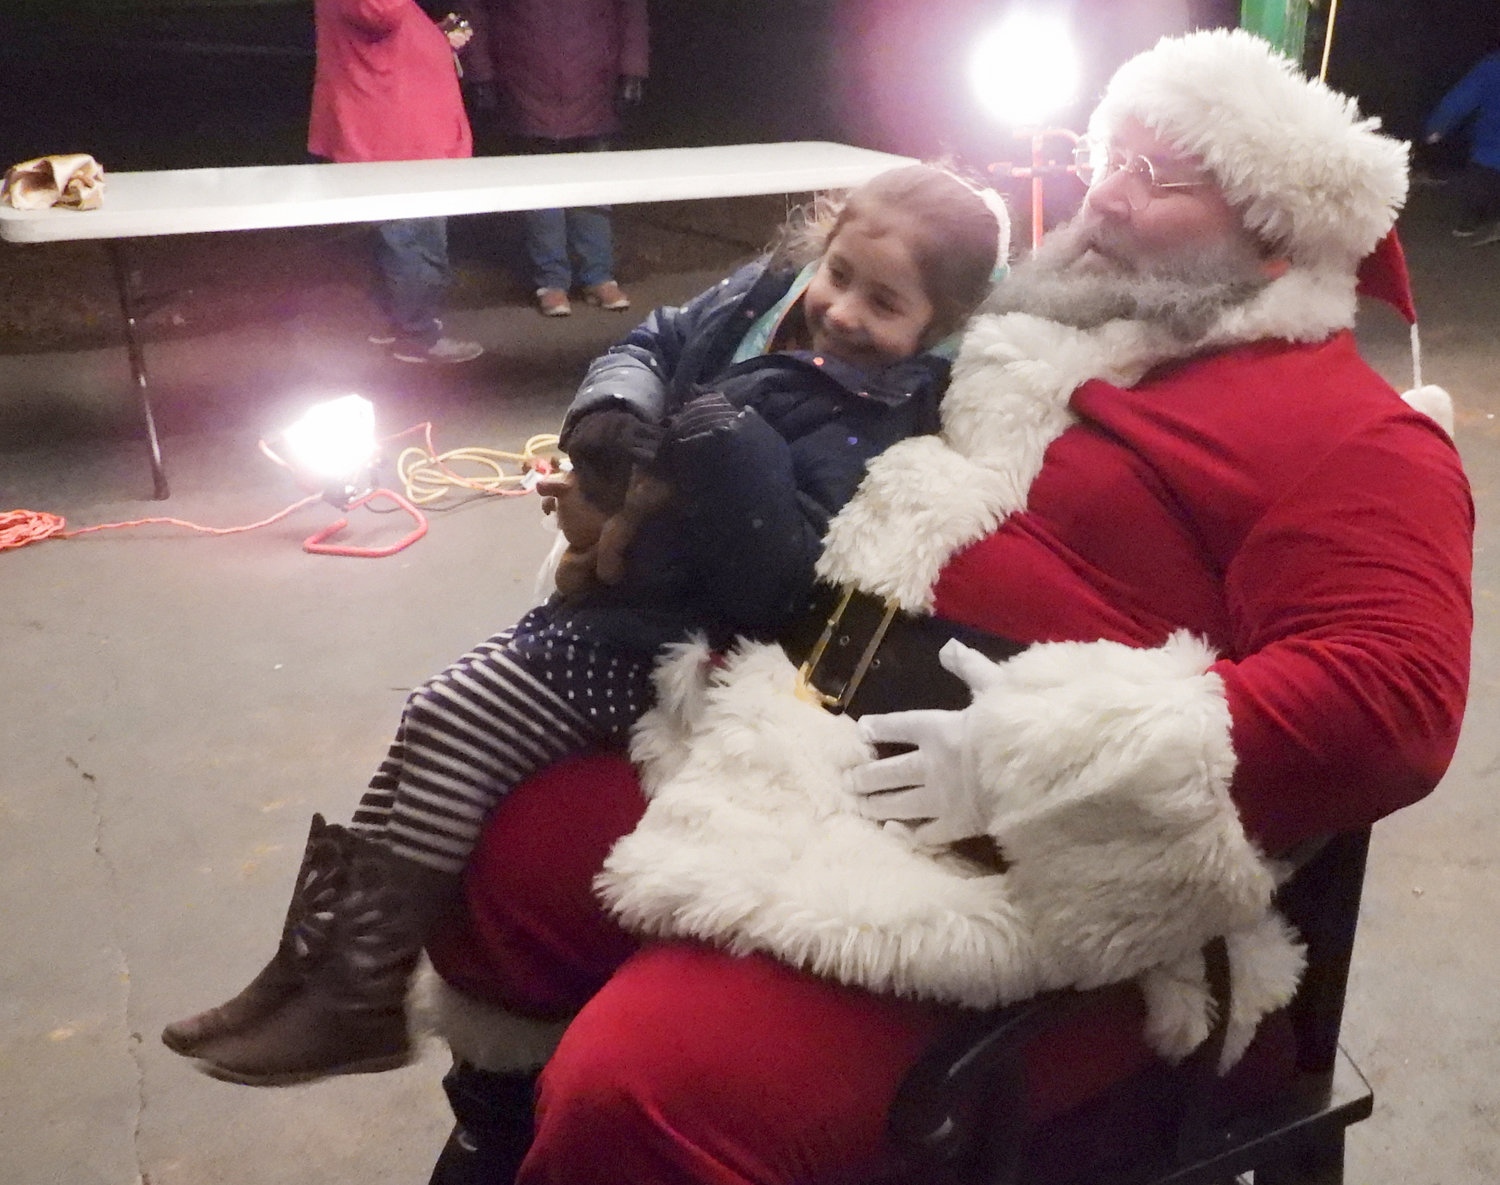 The city of Oneida welcomed in the holiday season with its second annual Parade of Lights, annual tree lighting, and a visit from Santa Claus. Pictured is Sophia Villavicencio, 4, from Oneida, sitting on Santa's lap.